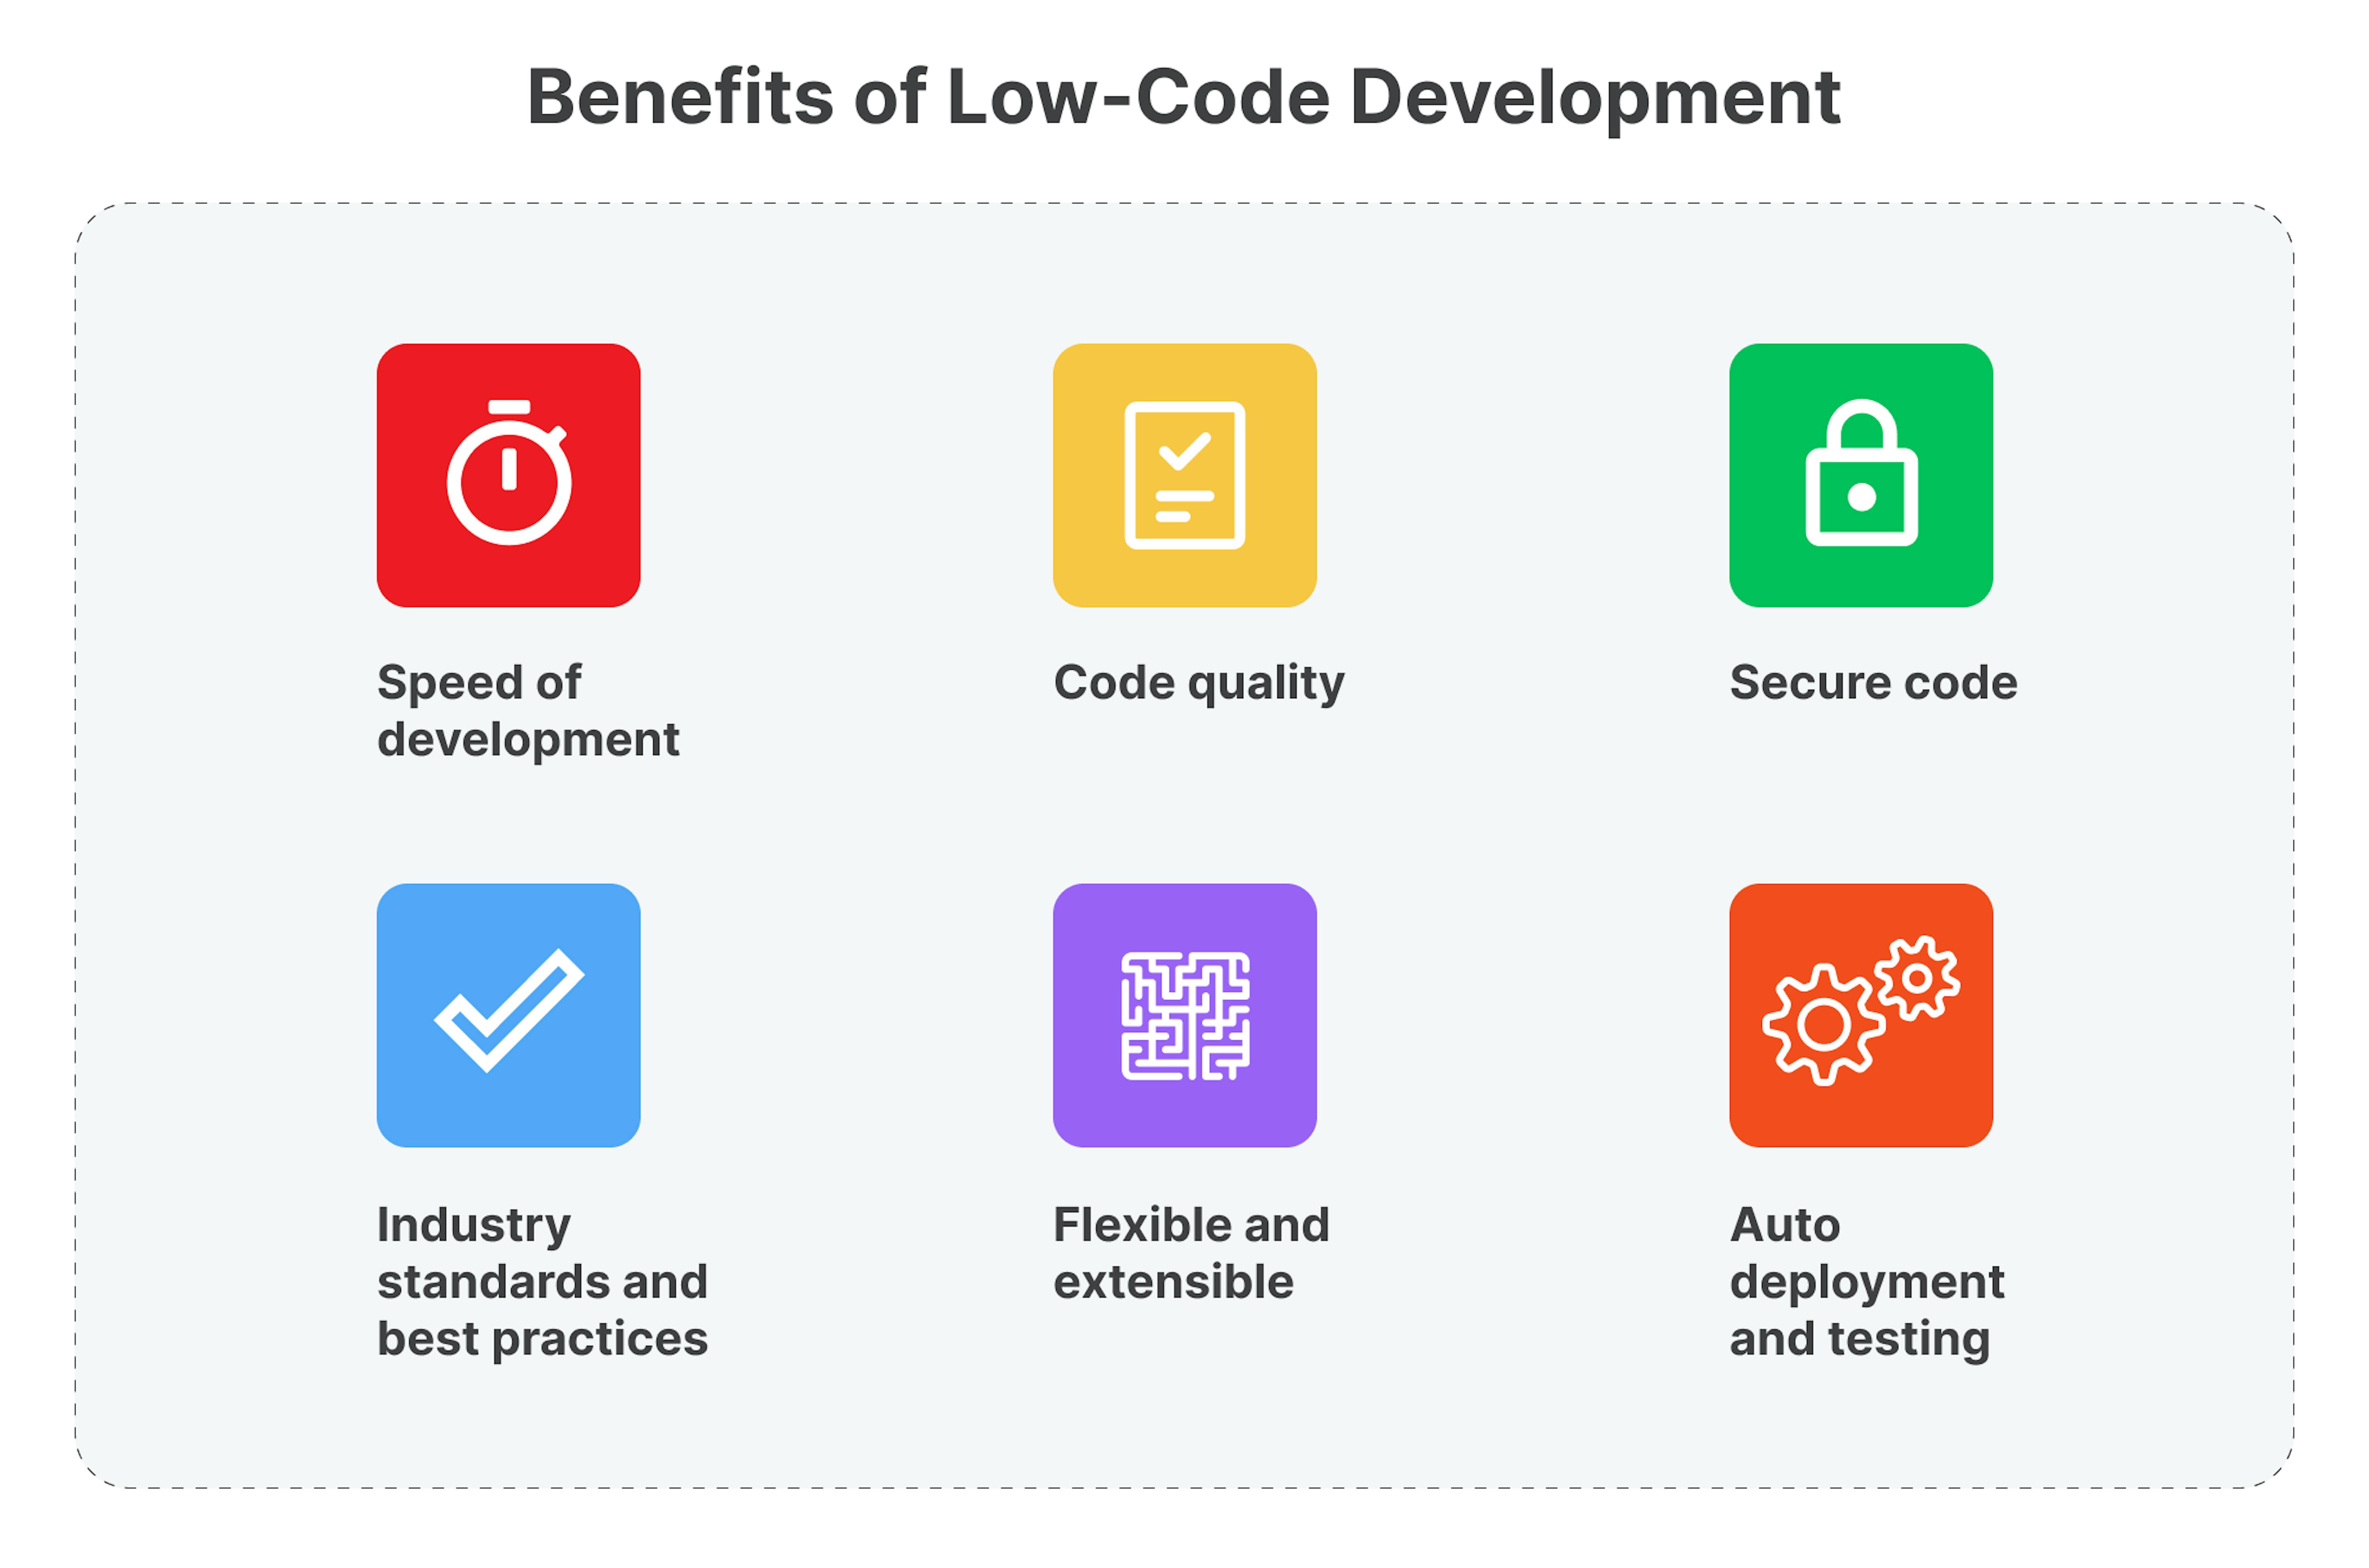 Pros of low-code application development